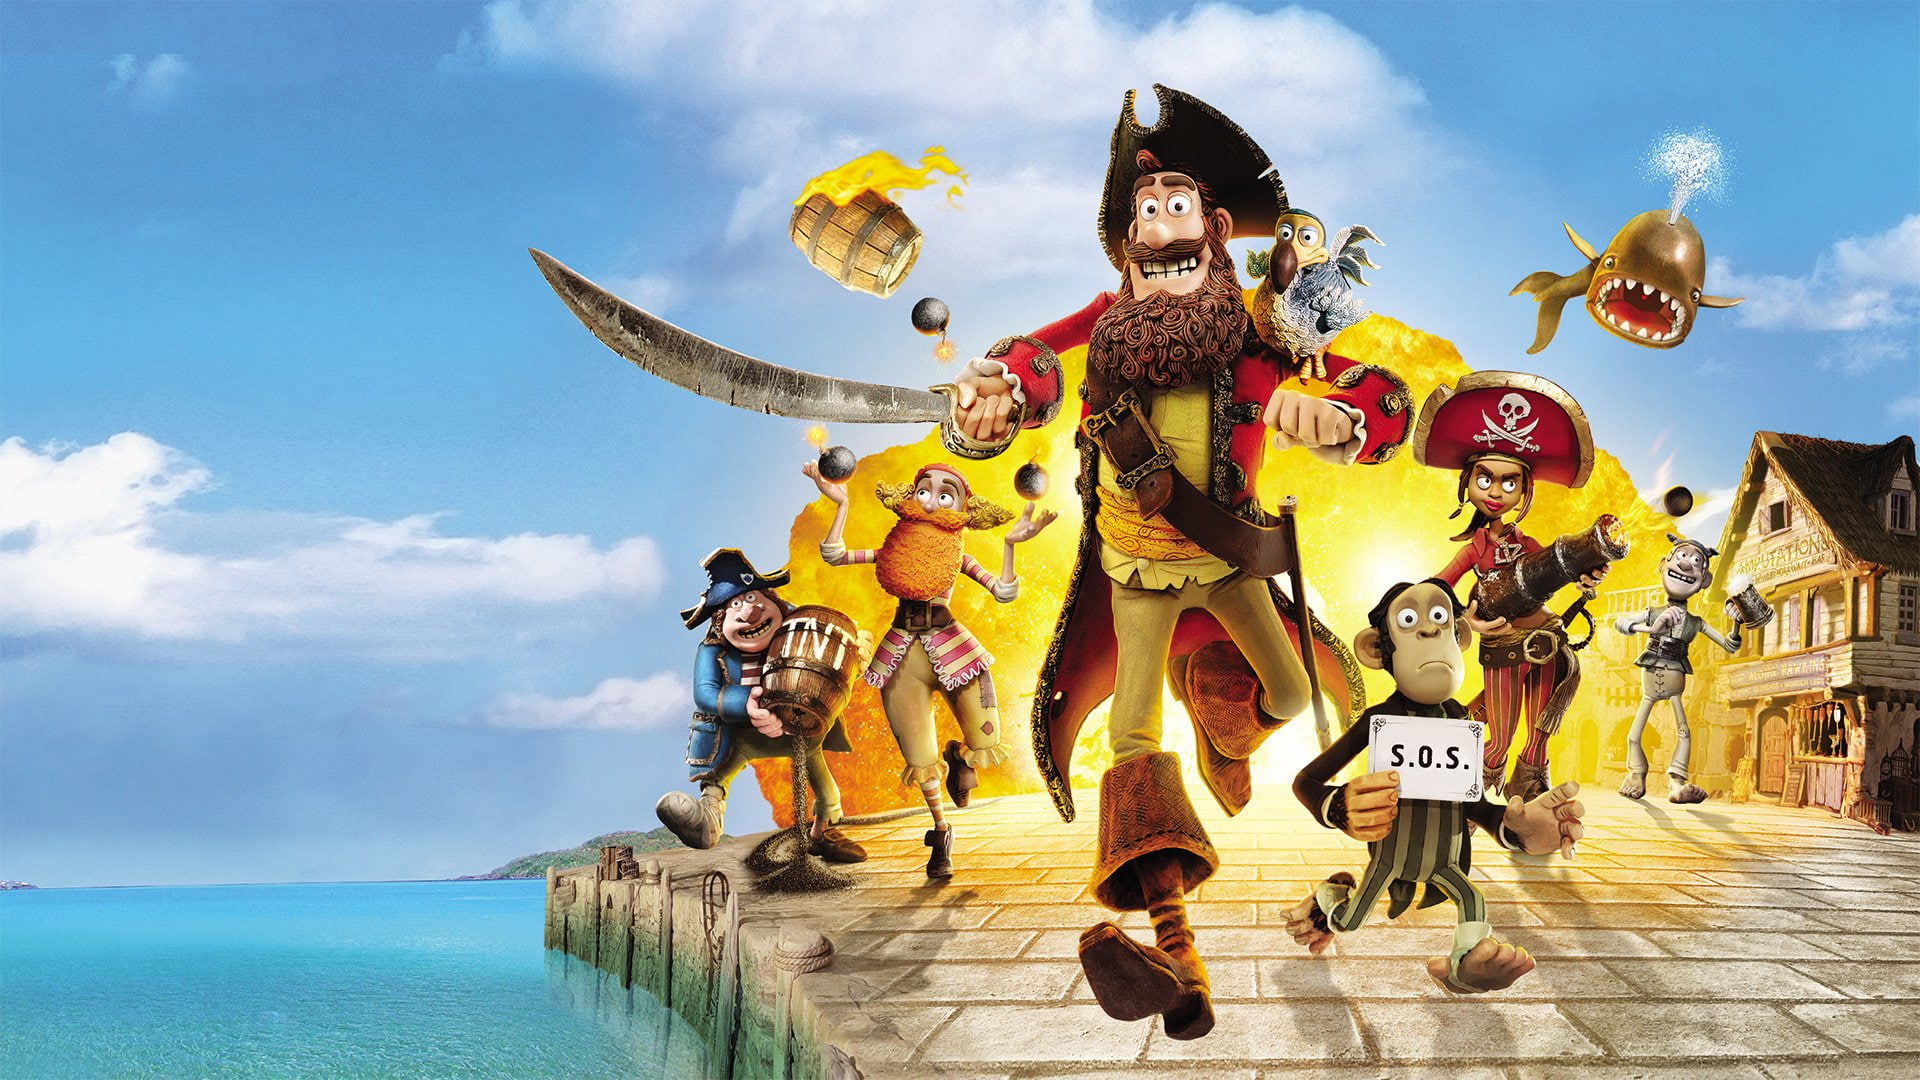 Movie, The Pirates! Band of Misfits